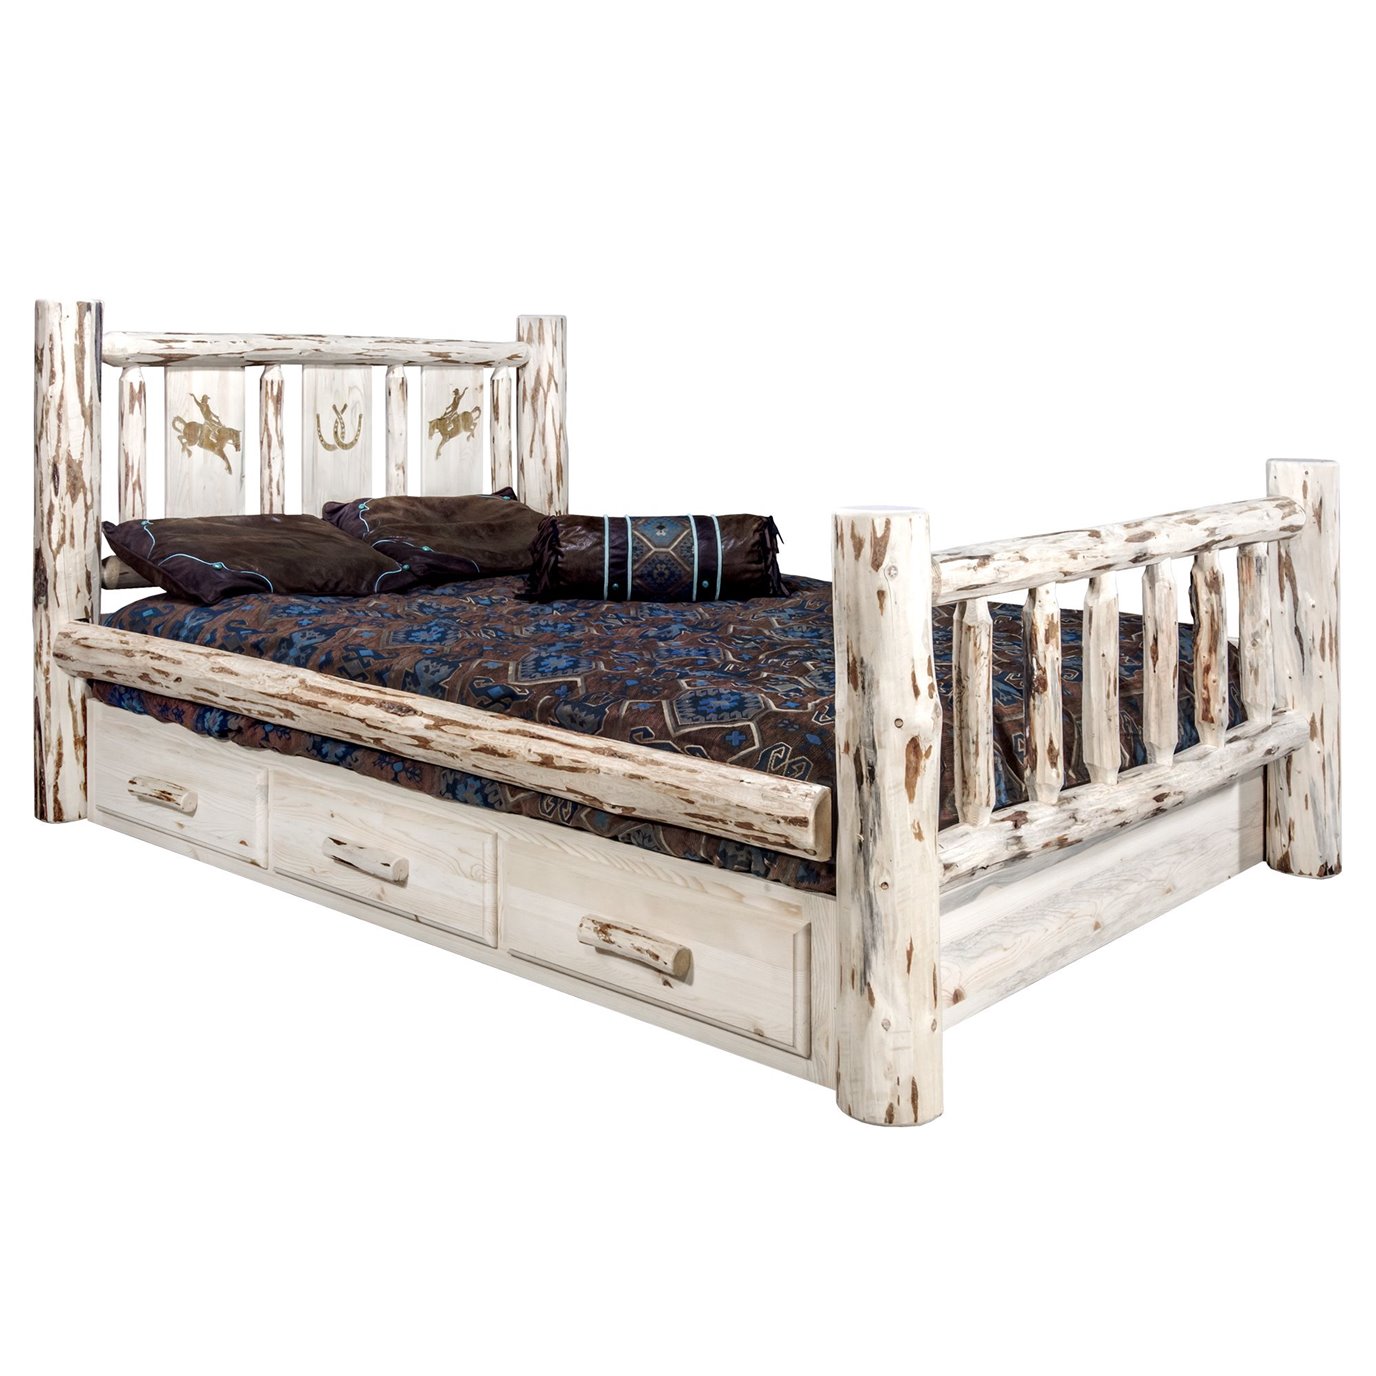 Montana Cal King Storage Bed w/ Laser Engraved Bronc Design - Clear Lacquer Finish